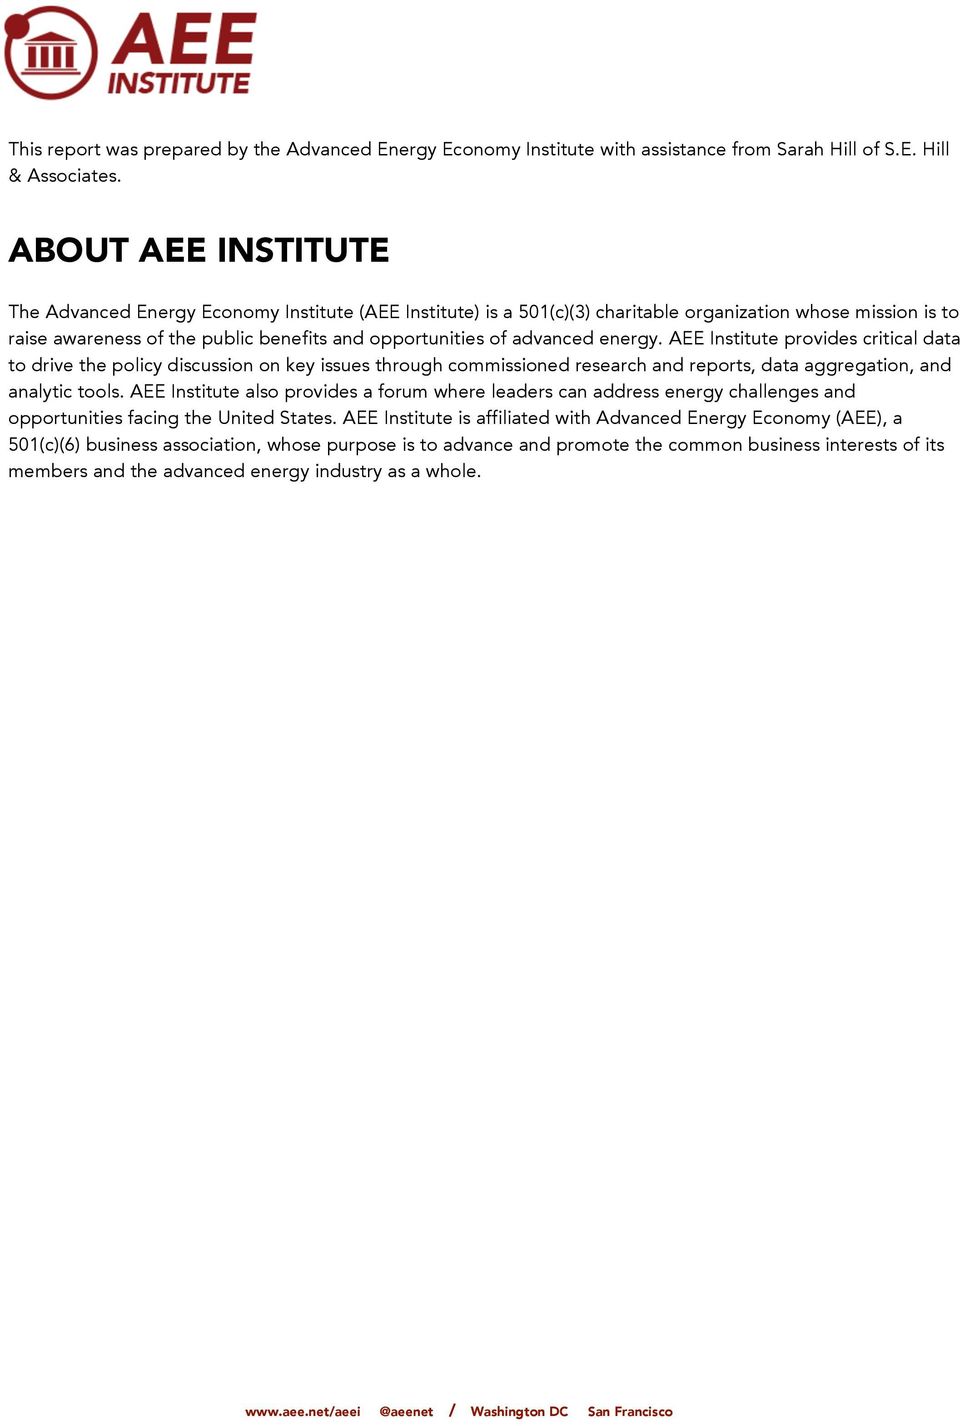 advanced energy. AEE Institute provides critical data to drive the policy discussion on key issues through commissioned research and reports, data aggregation, and analytic tools.